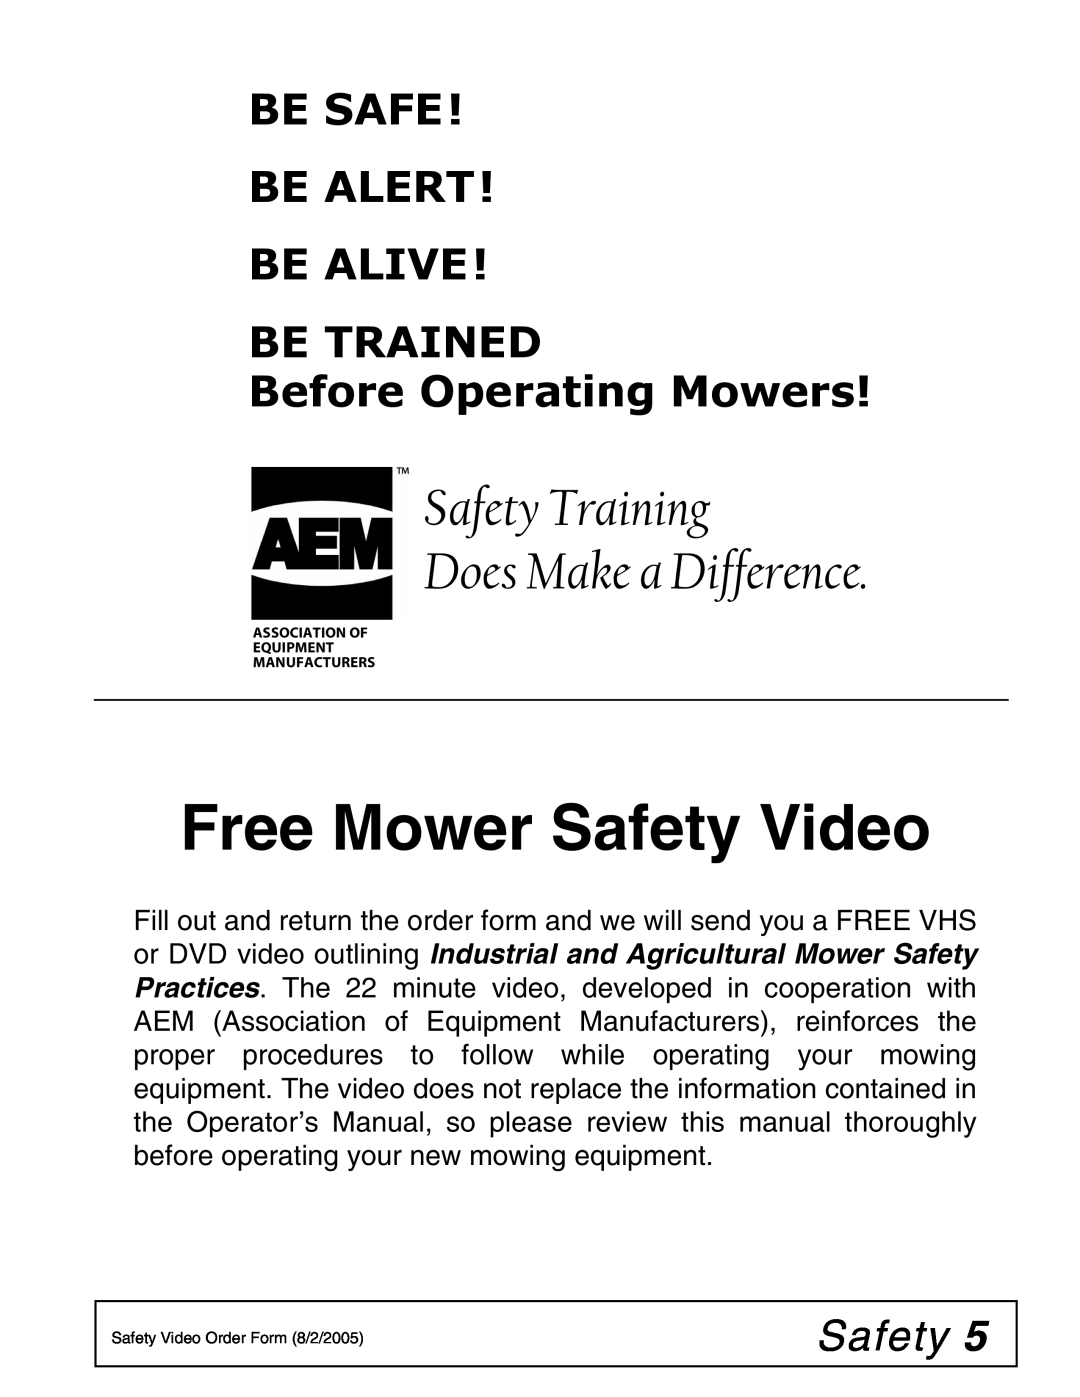 Woods Equipment BB7200X, MAN0680, BB8400X, BB6000X manual Free Mower Safety Video, Safety Training Does Make a Difference 